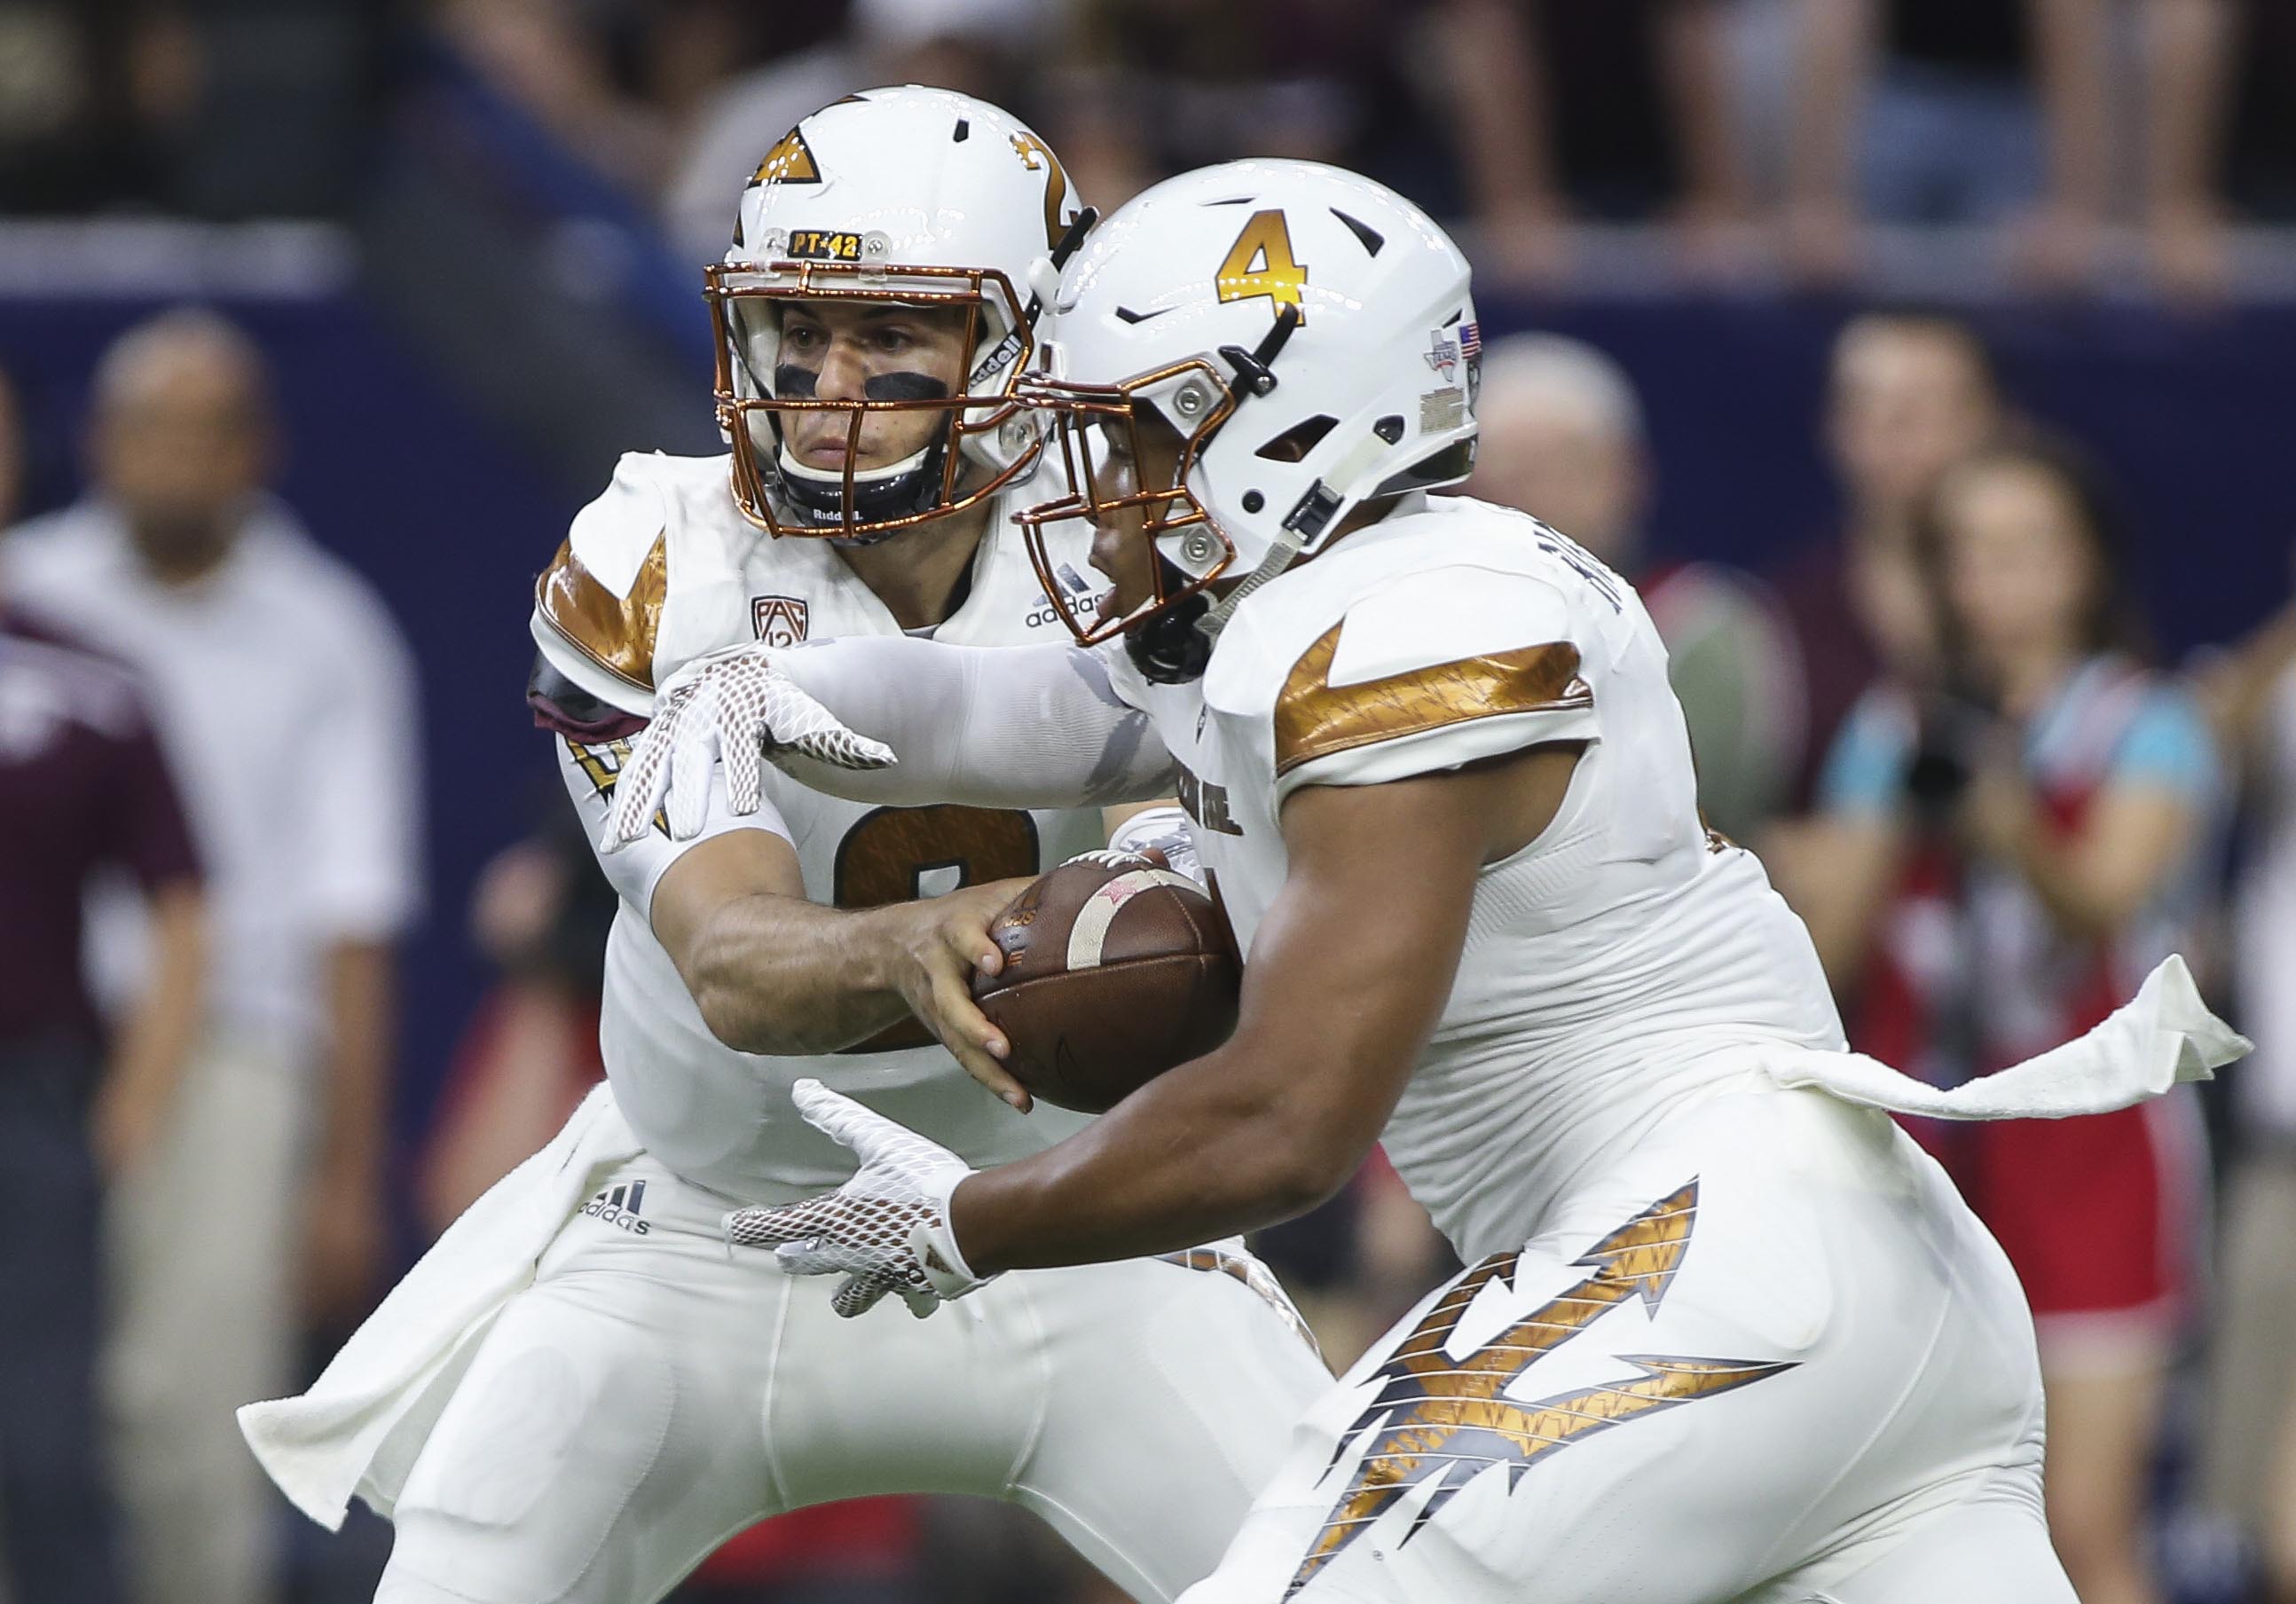 On offense against UCLA, Arizona State will rely on QB, Mike Bercovici, and RB, Demario Richard.